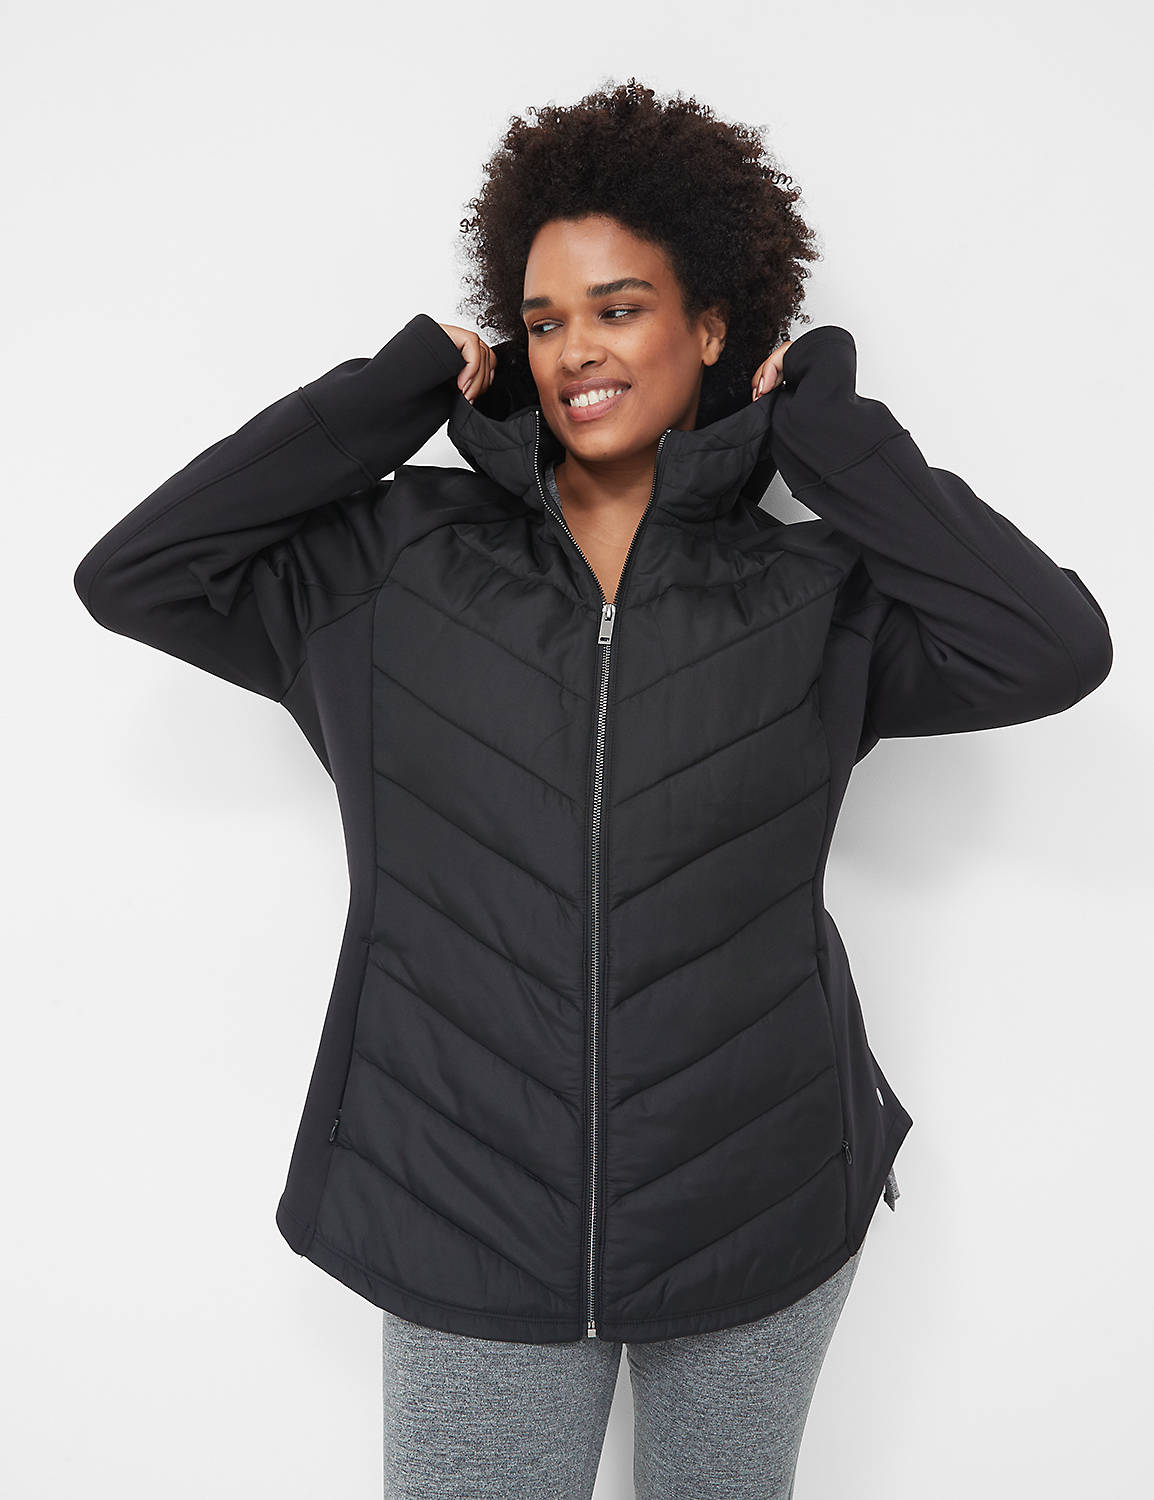 LIVI Quilted Hooded Performance Jac | LaneBryant